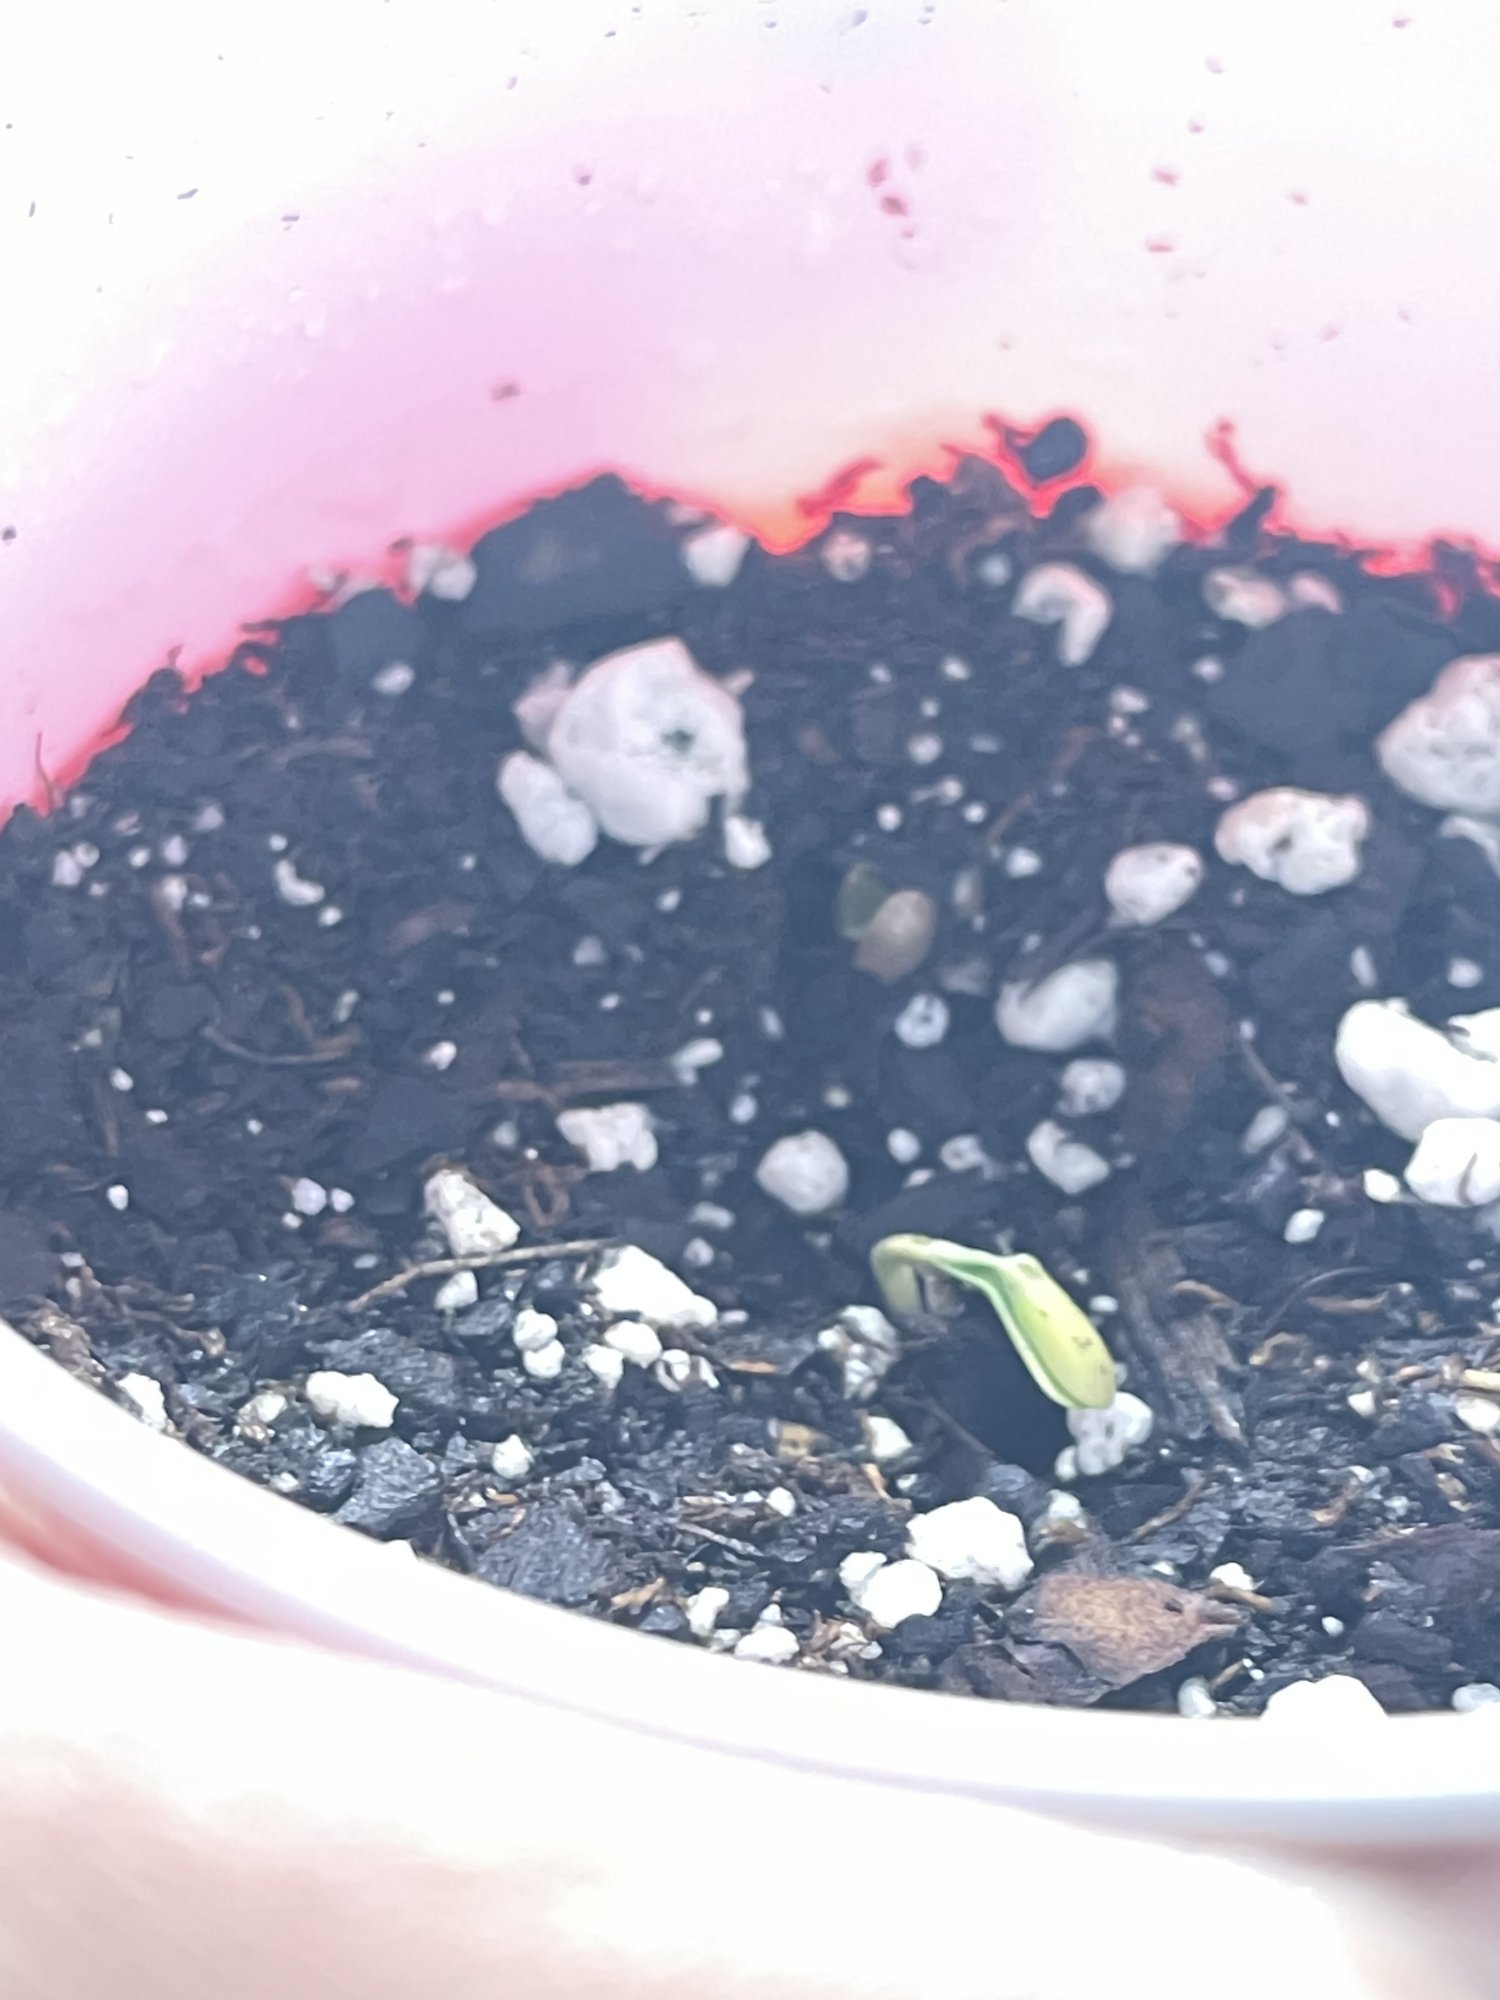 Just sprouted today is it ok or did i fck something up again 2